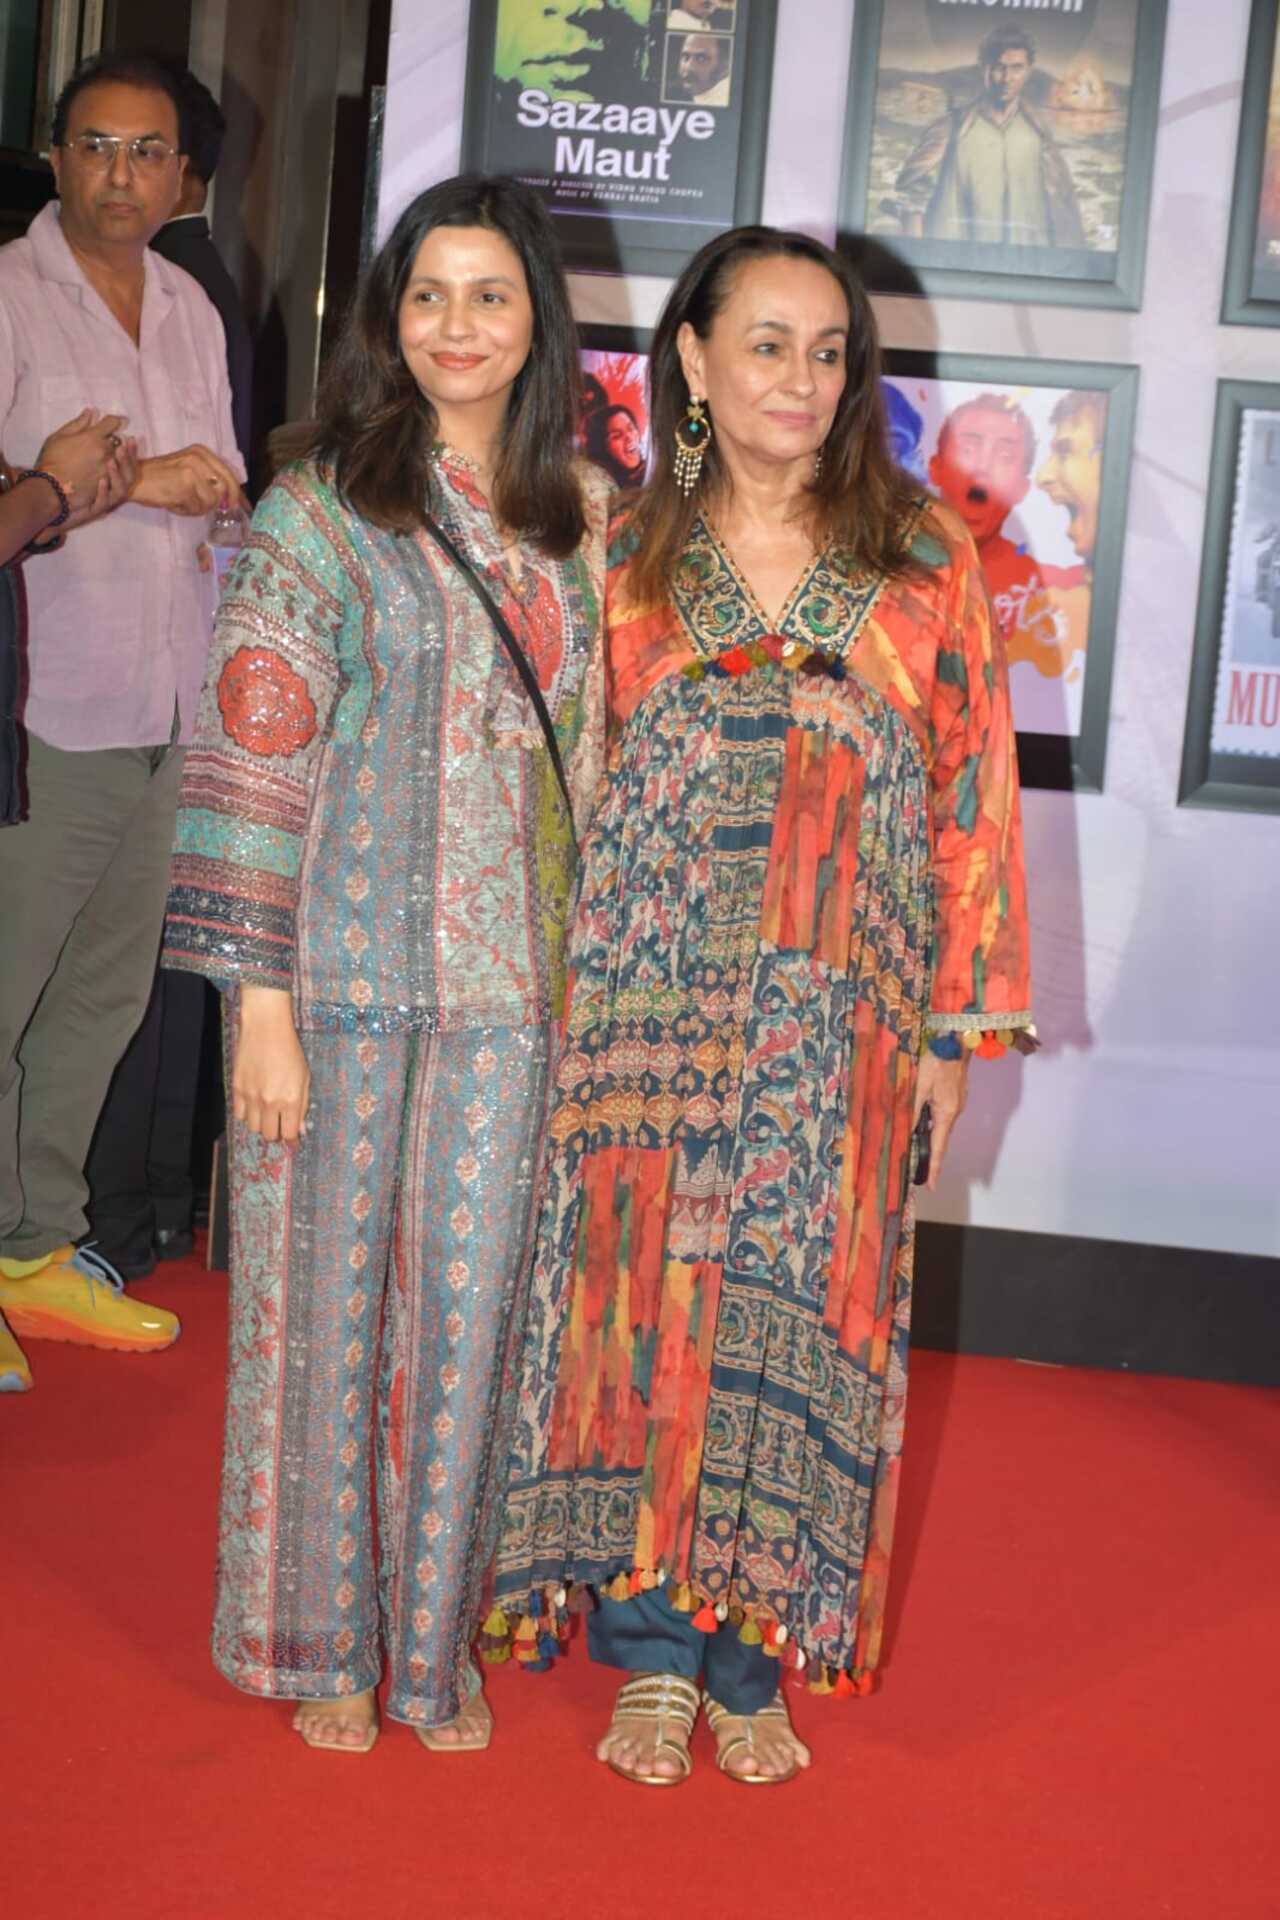 Soni Razdan, who was a part of the 1986 film Khamosh, arrived for the screening with her daughter Shaheen Bhatt